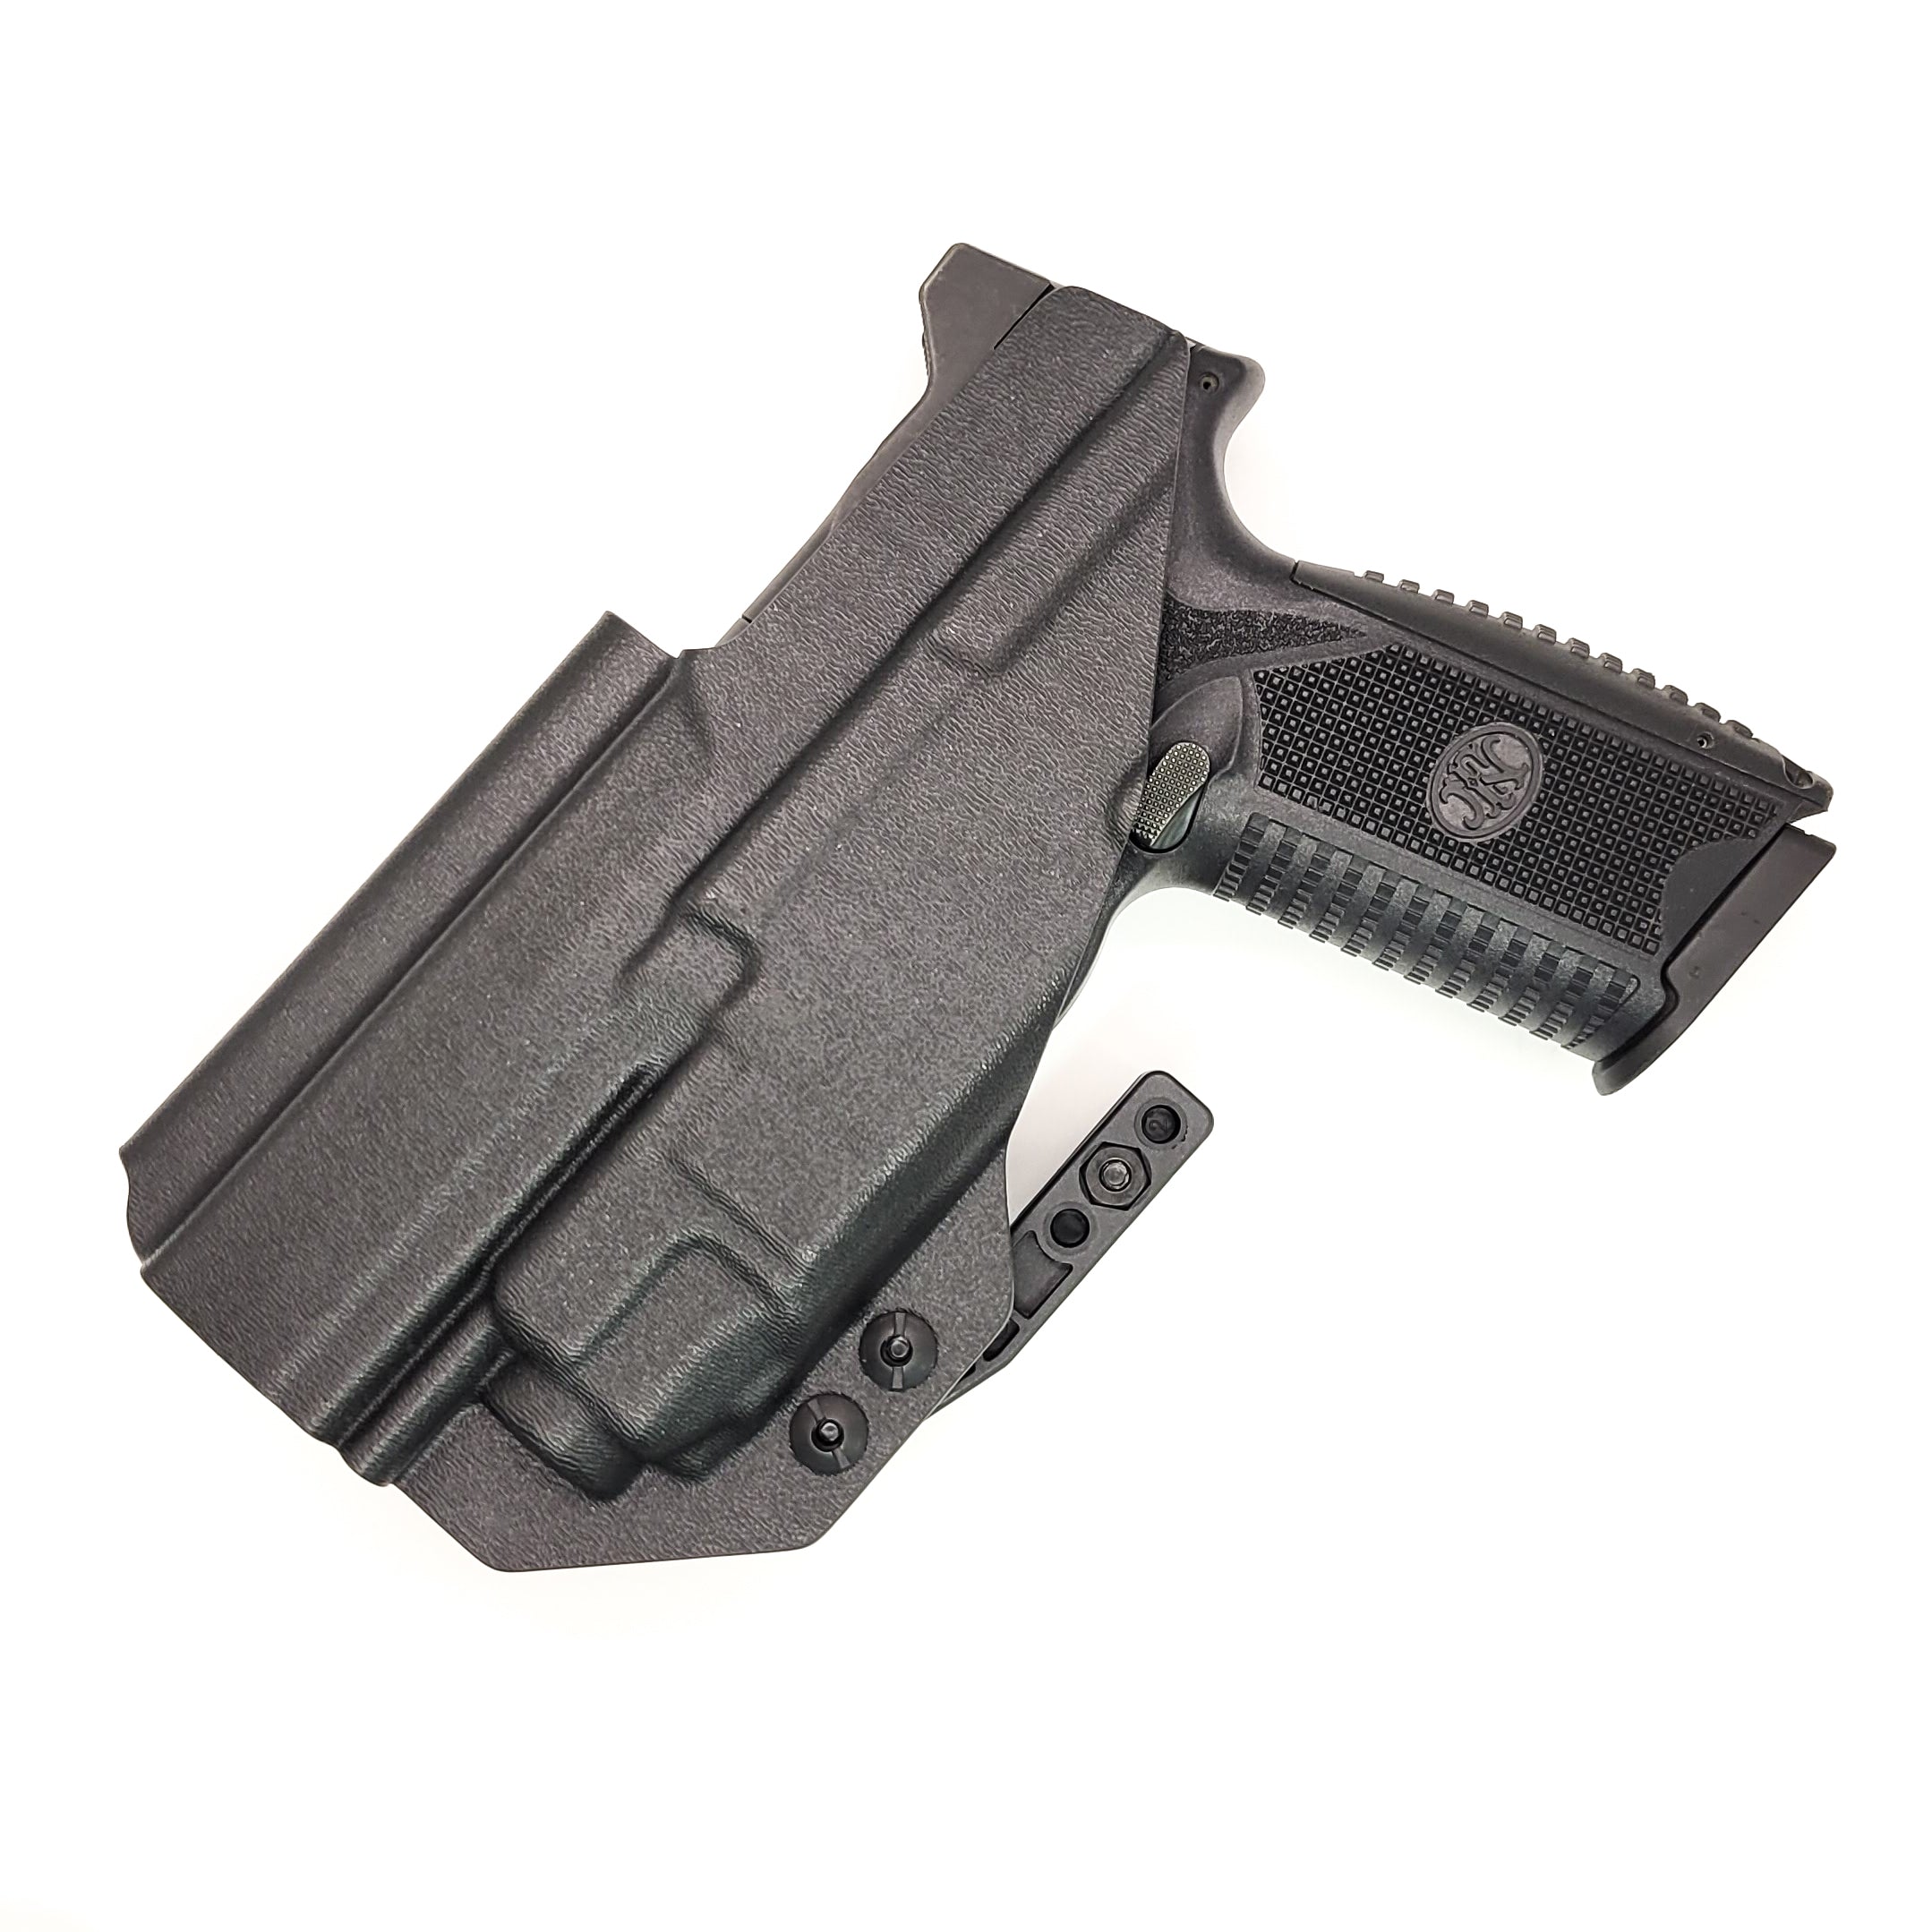 For the best, Inside Waistband IWB AIWB Kydex Holster for the FN 509 compact, 509, 509 Tactical with the Streamlight TLR-8 or TLR-8A, shop Four Brothers Holsters. Open Muzzle, adjustable retention, cleared for suppressor height sights up to 3/8", full sweat guard, cut for red dot sights and optics. Made in the USA.